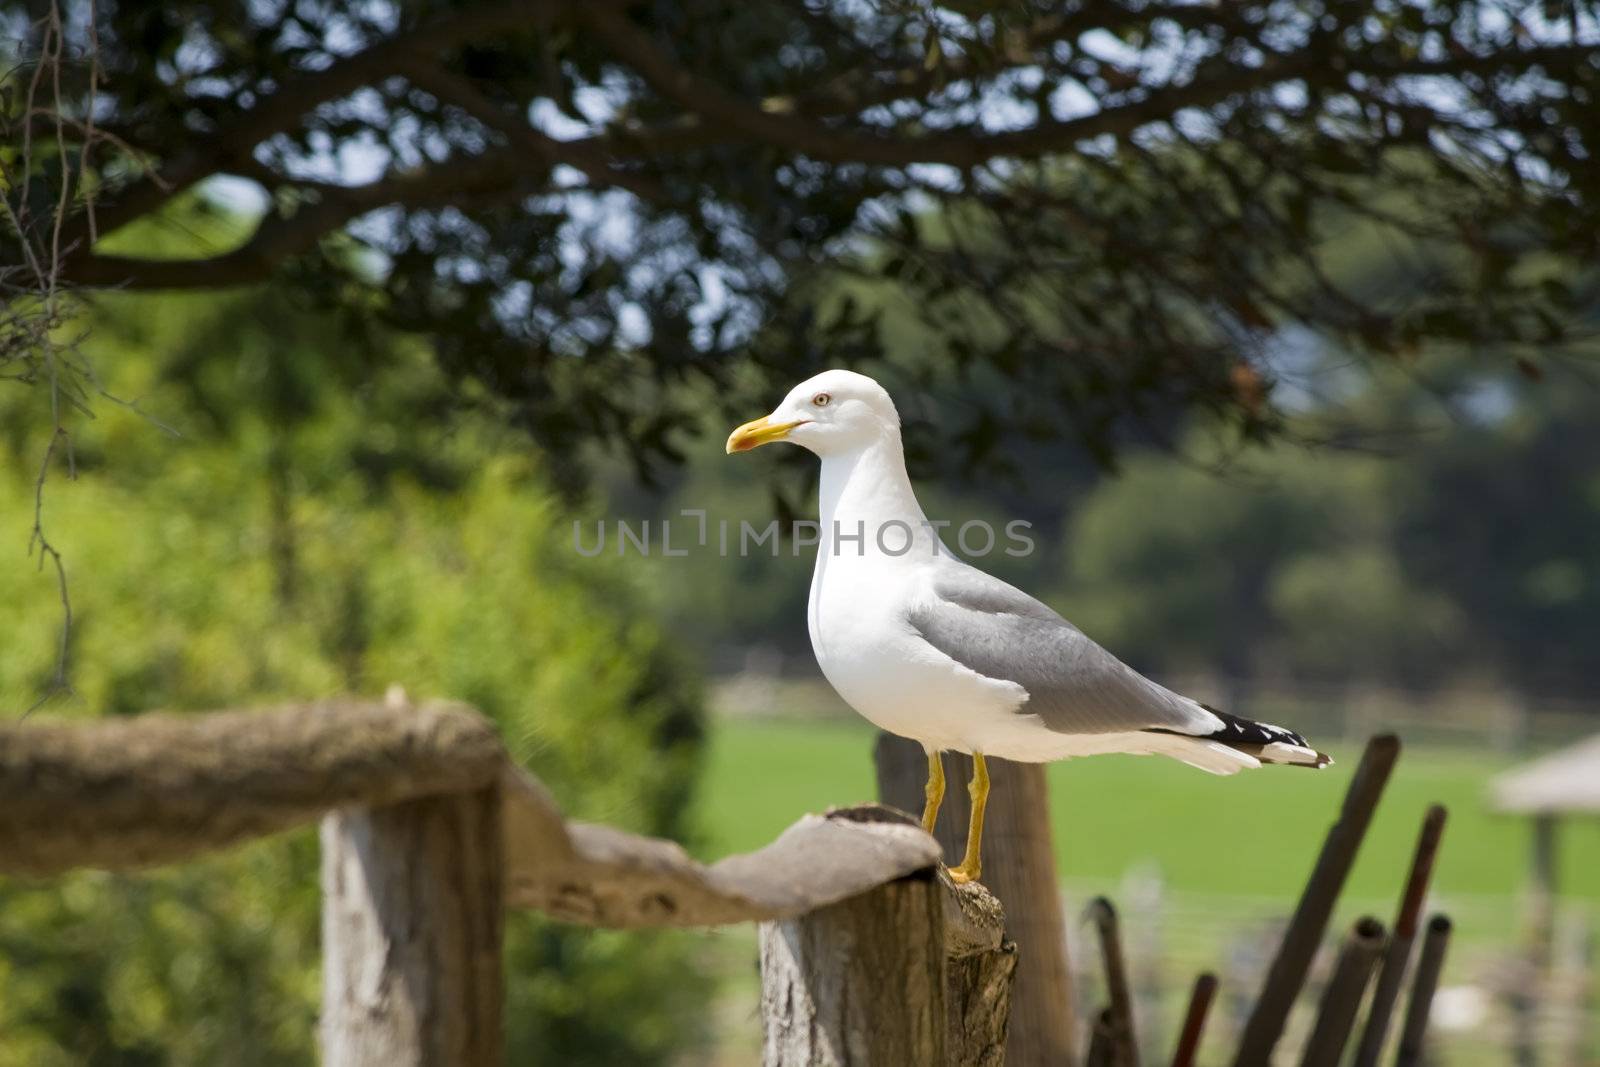 seagull on a wooden fence by nubephoto